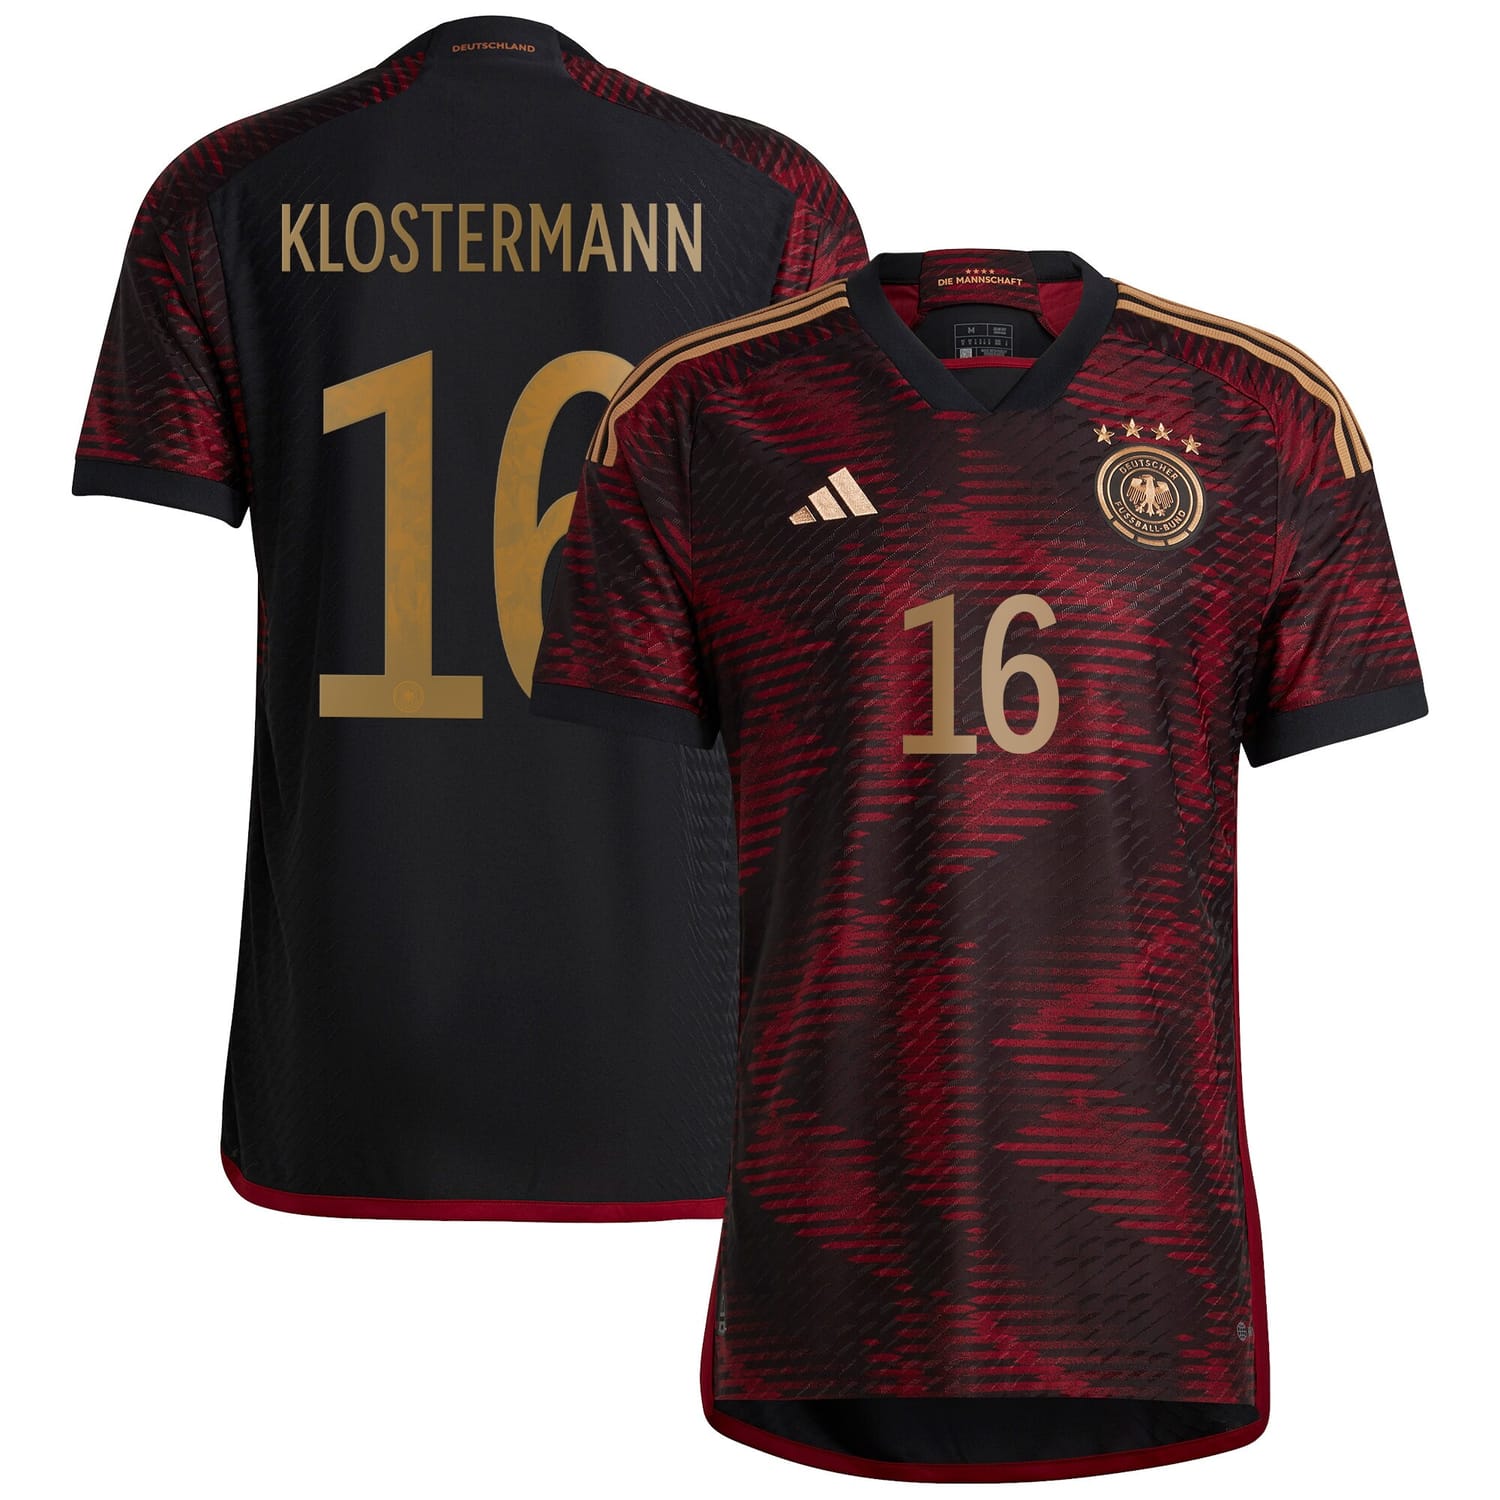 Germany National Team Away Authentic Jersey Shirt player Lukas Klostermann 16 printing for Men